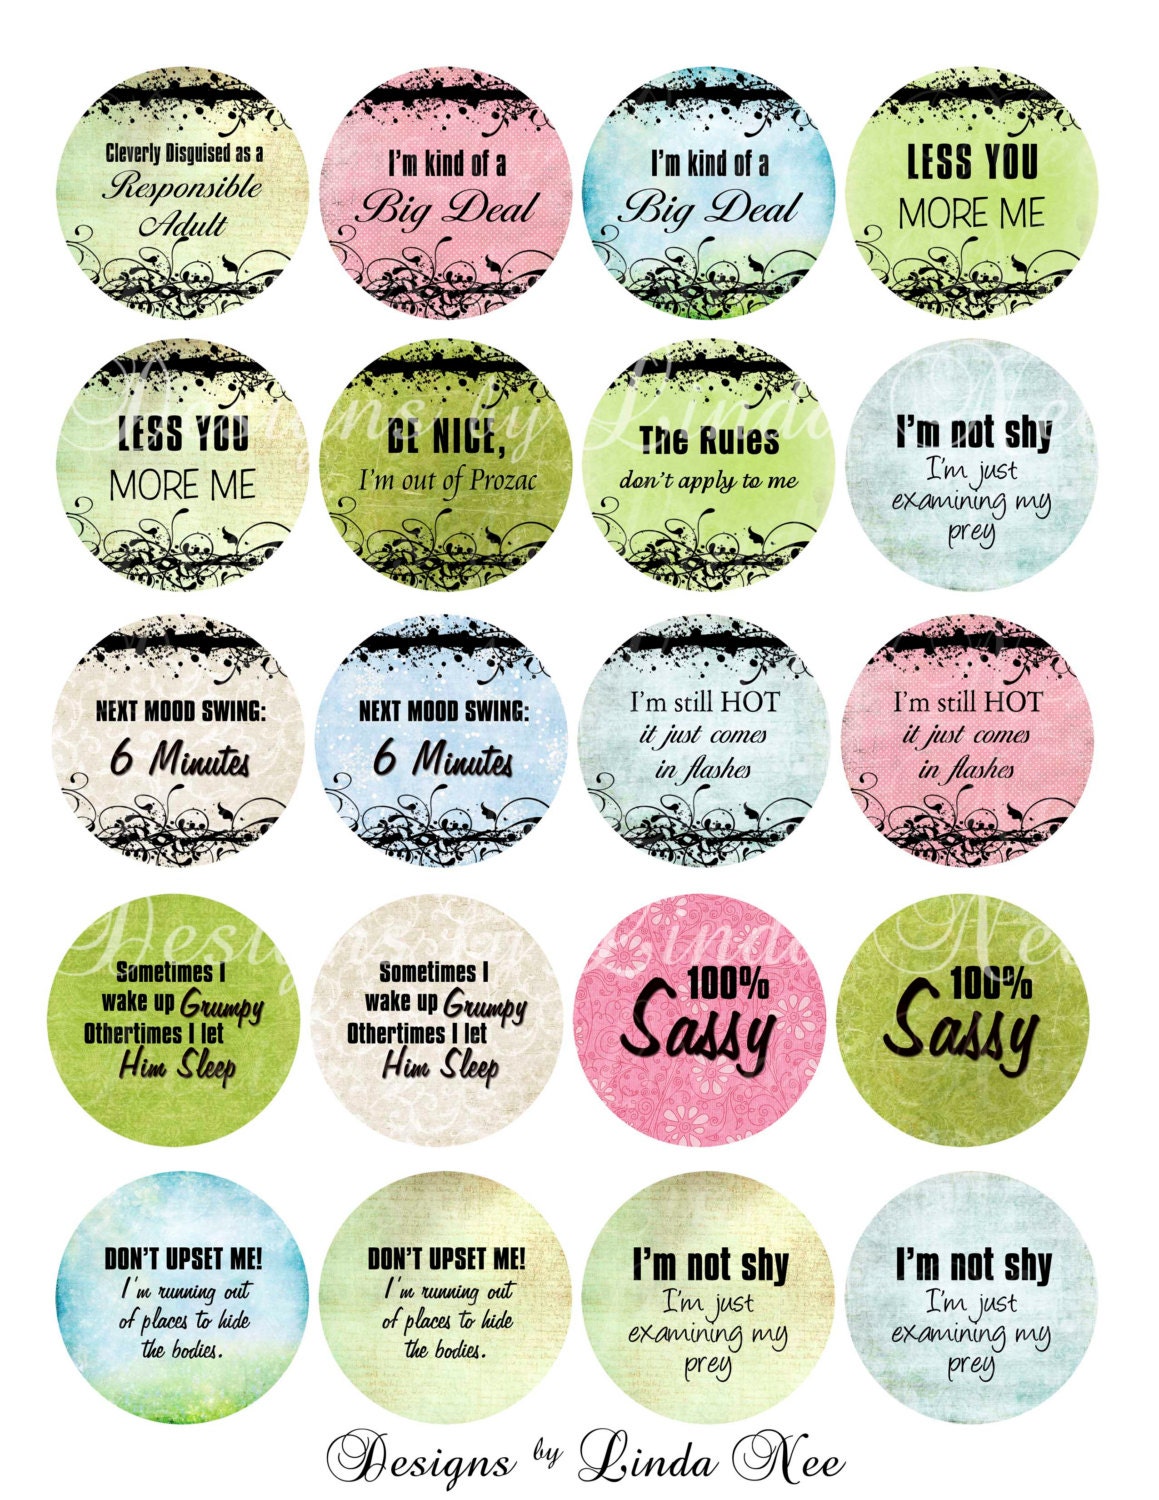 Pinback BUTTON Images 1 Inch Round 1.313 Overall Size Say It - Etsy